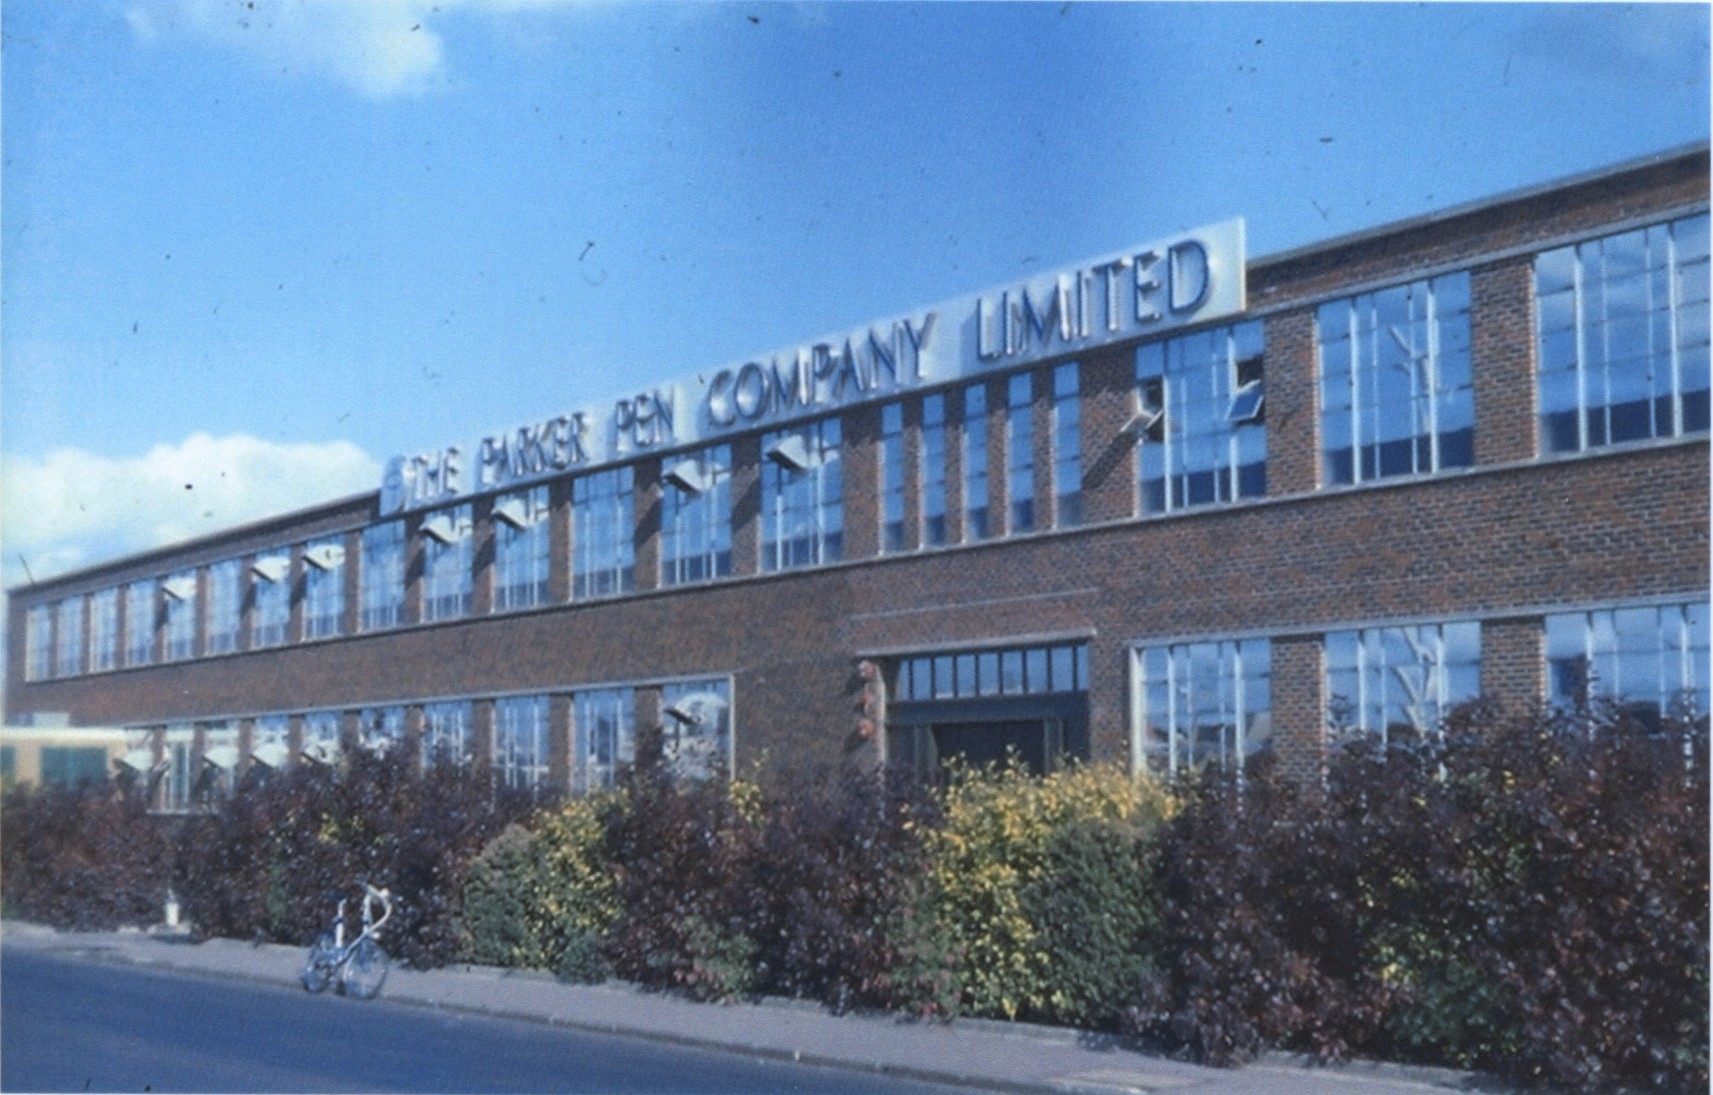 A photograph of a factory building with many glass windows. A sign at the top of the building reads "THE PARKER PEN COMPANY LIMITED".